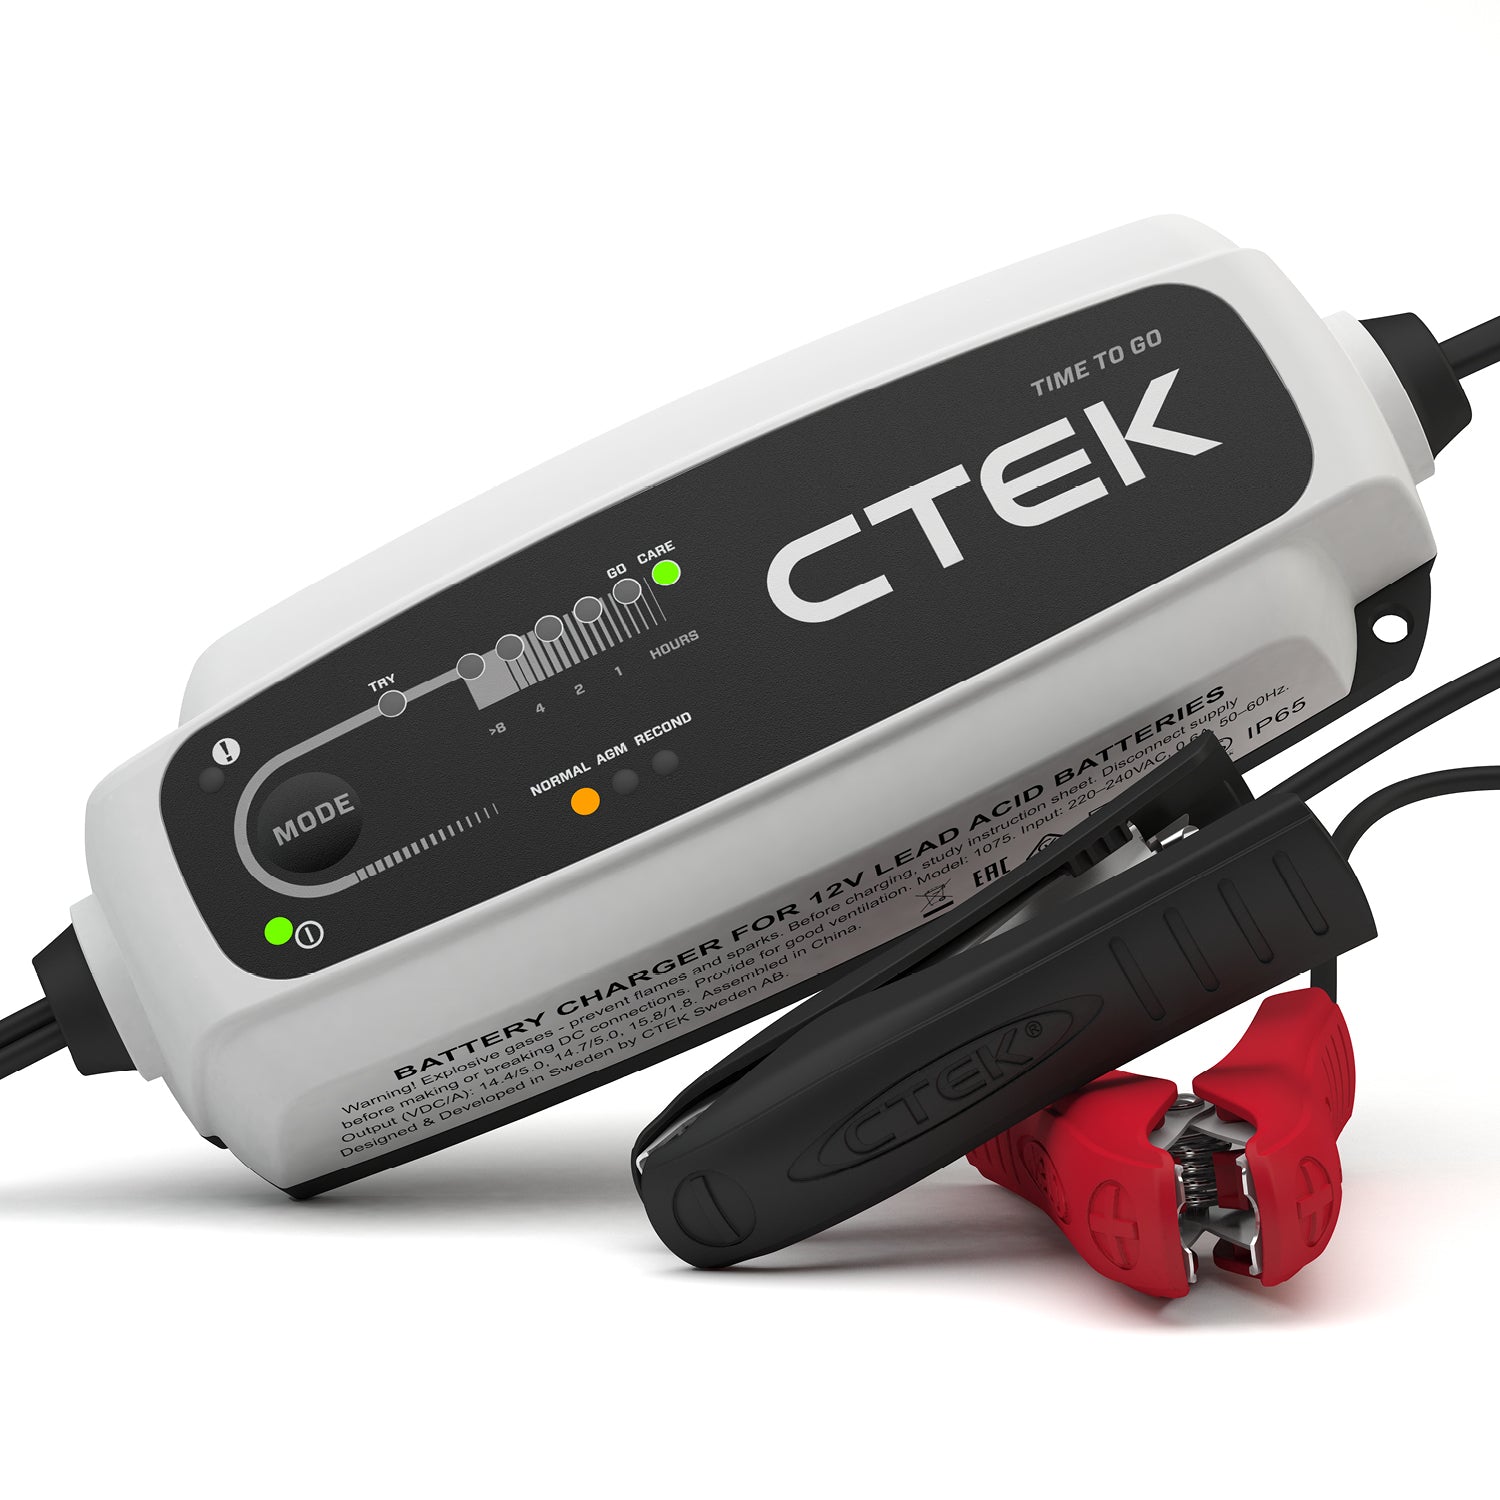 PUMP'IN CTEK Ctek CT5 TIME TO GO - Battery Float Charger - Private